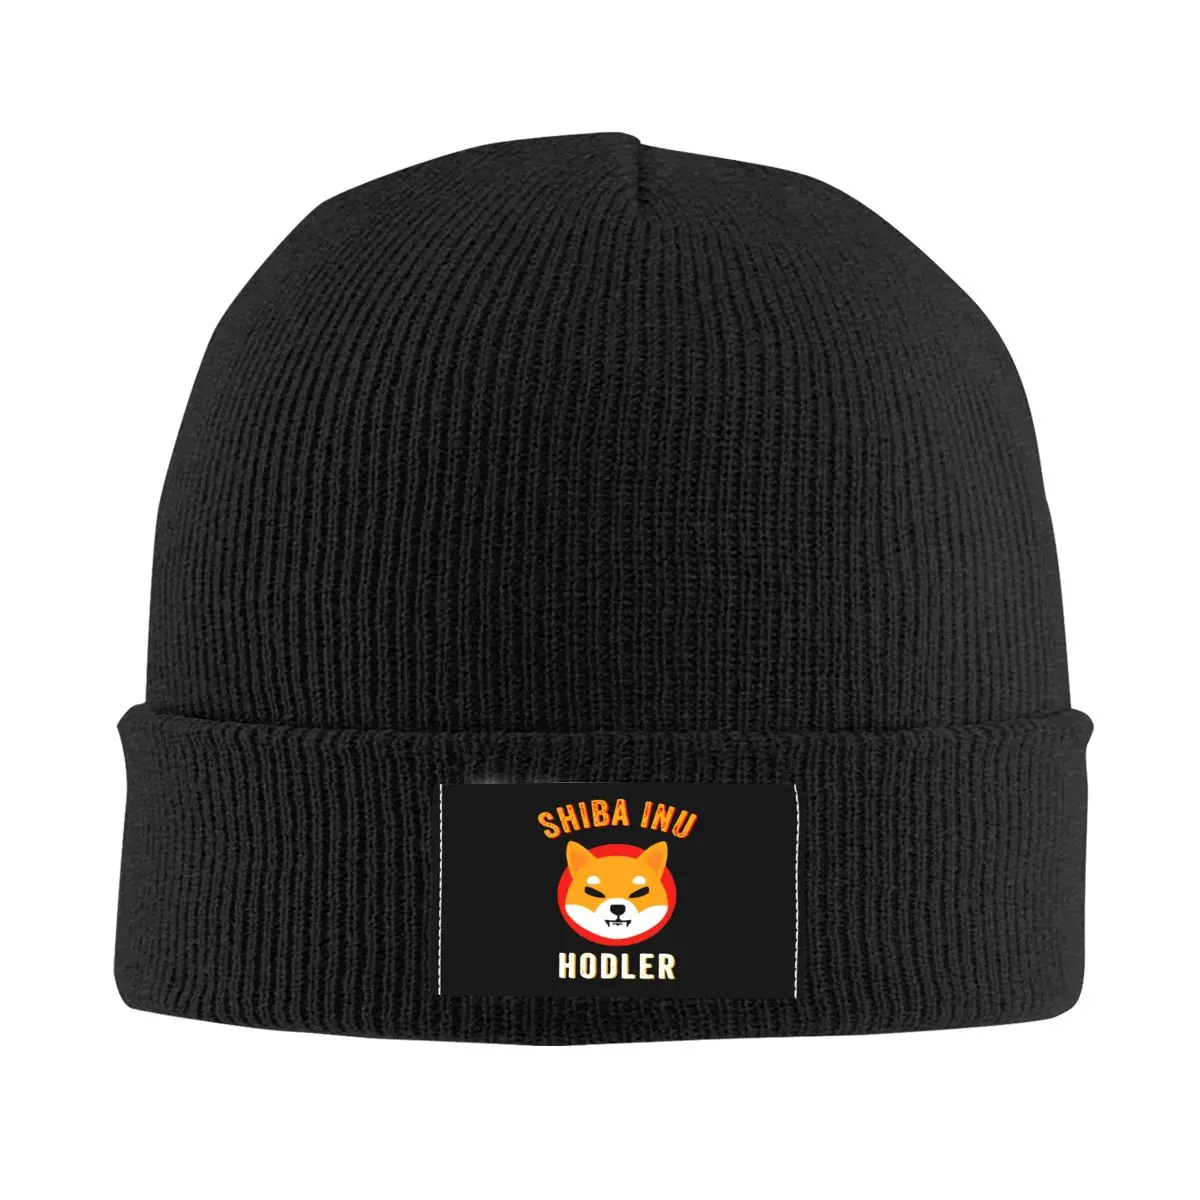 

Shiba Inu Hodler Token Crypto Coin Knitted Hat for Men Skullies Beanies Winter Hats SHIB Doge Bitcoin Cryptocurrency Crochet Cap